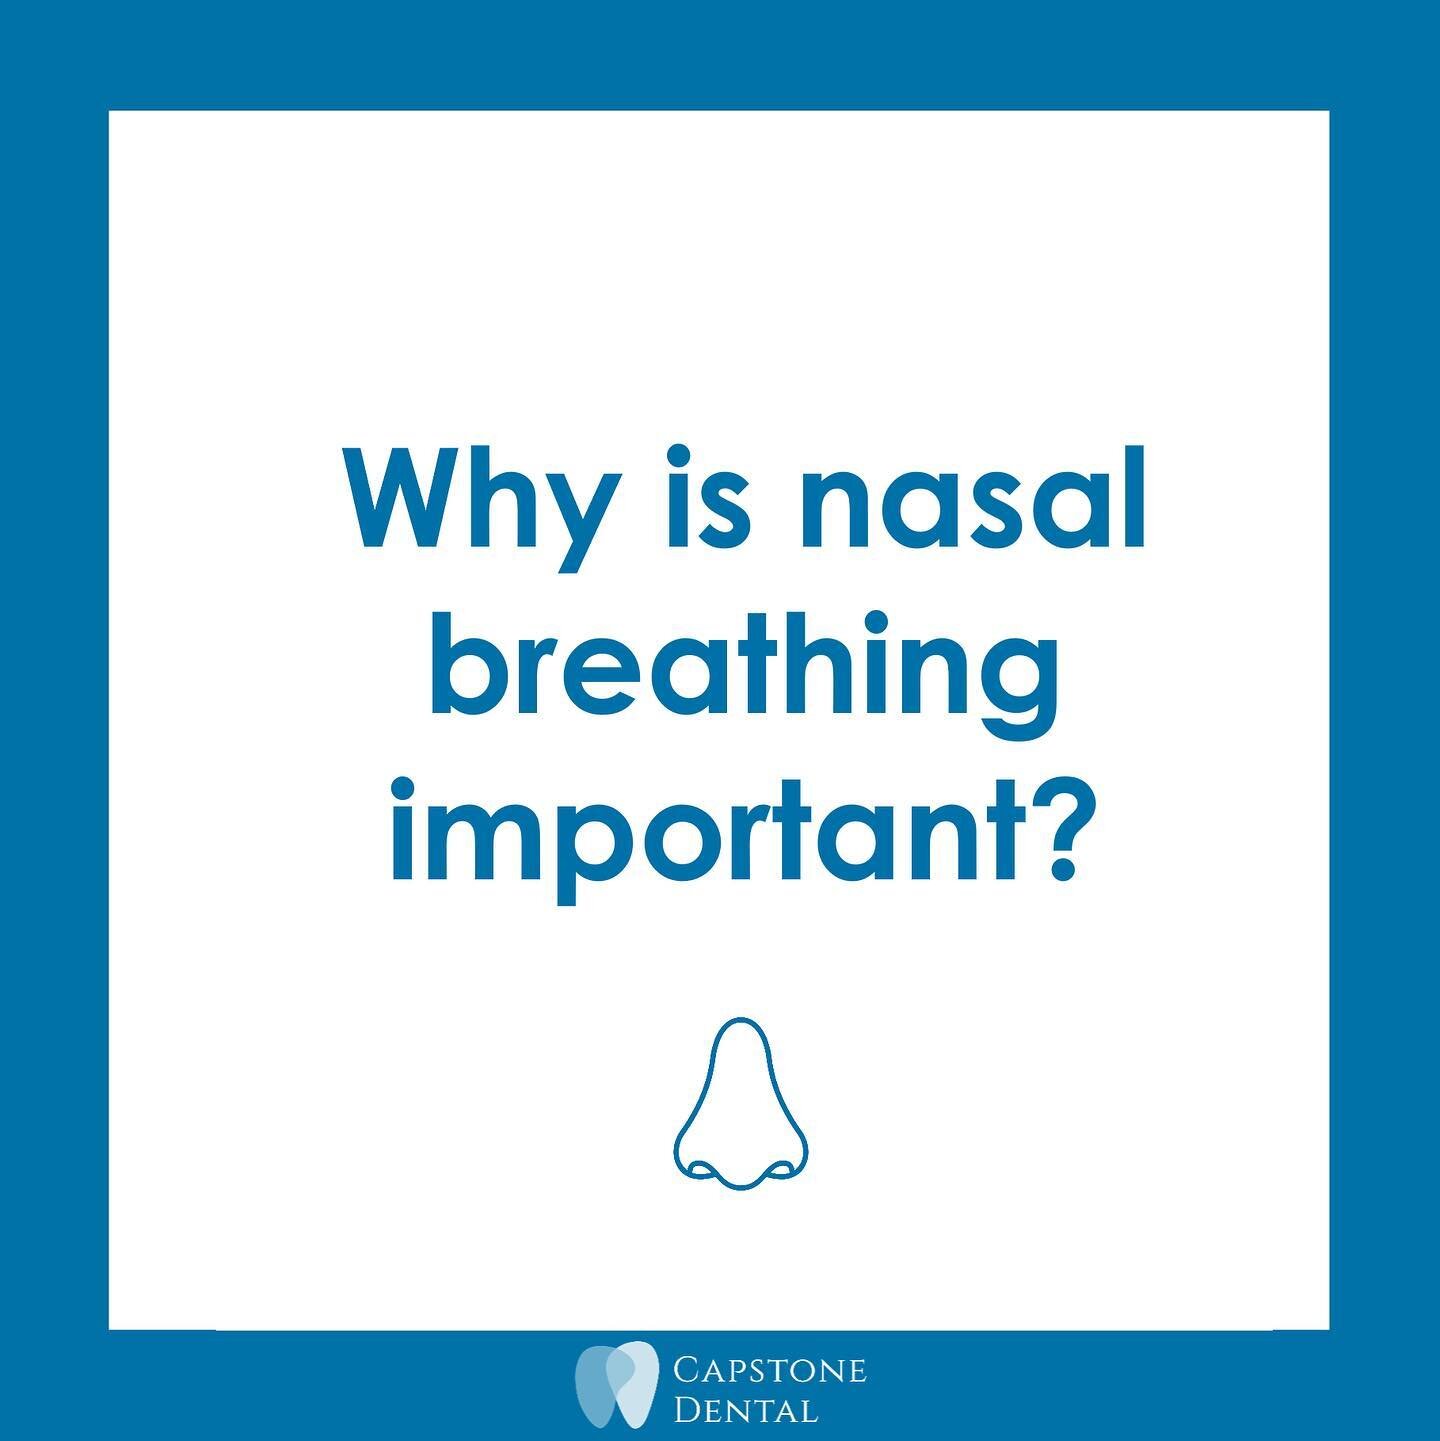 👃🏻 Why is breathing through the nose important? Why are the airways related to TMJ problems?

Watch this video to find out more
https://www.youtube.com/watch?v=GGEFlhYlpok

A clear nasal passage is critical to the development of normal teeth in chi